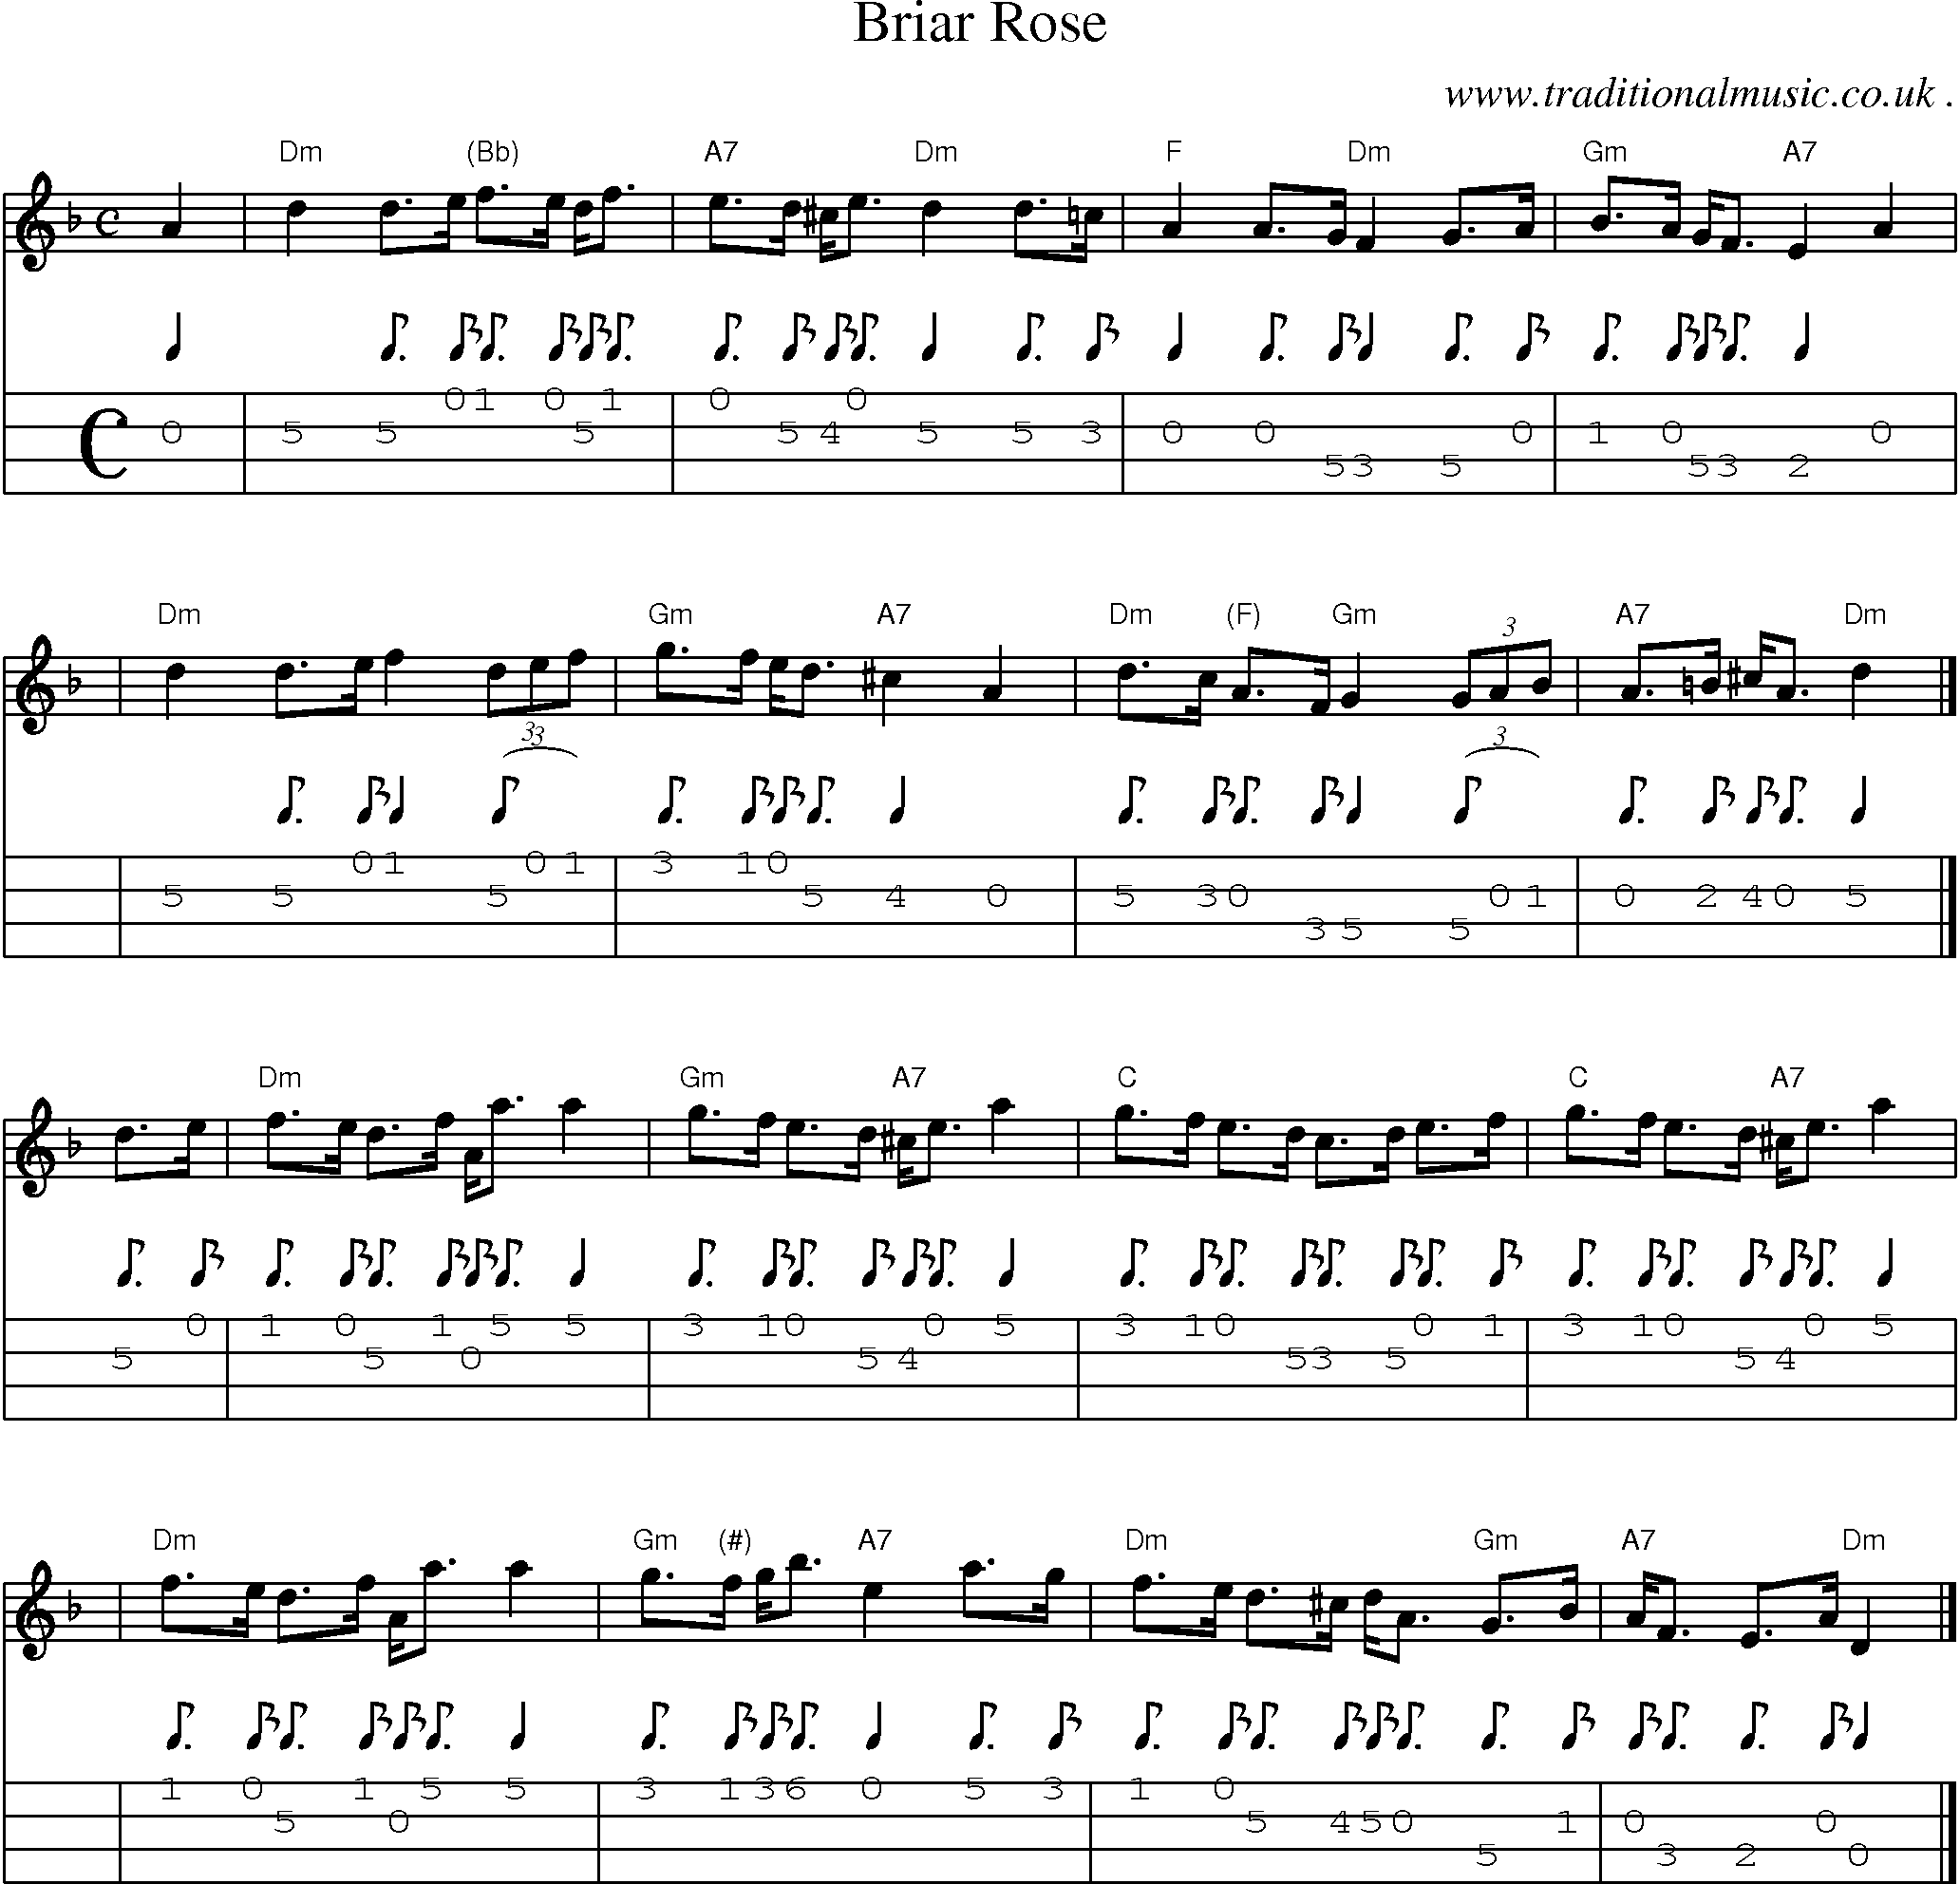 Sheet-music  score, Chords and Mandolin Tabs for Briar Rose